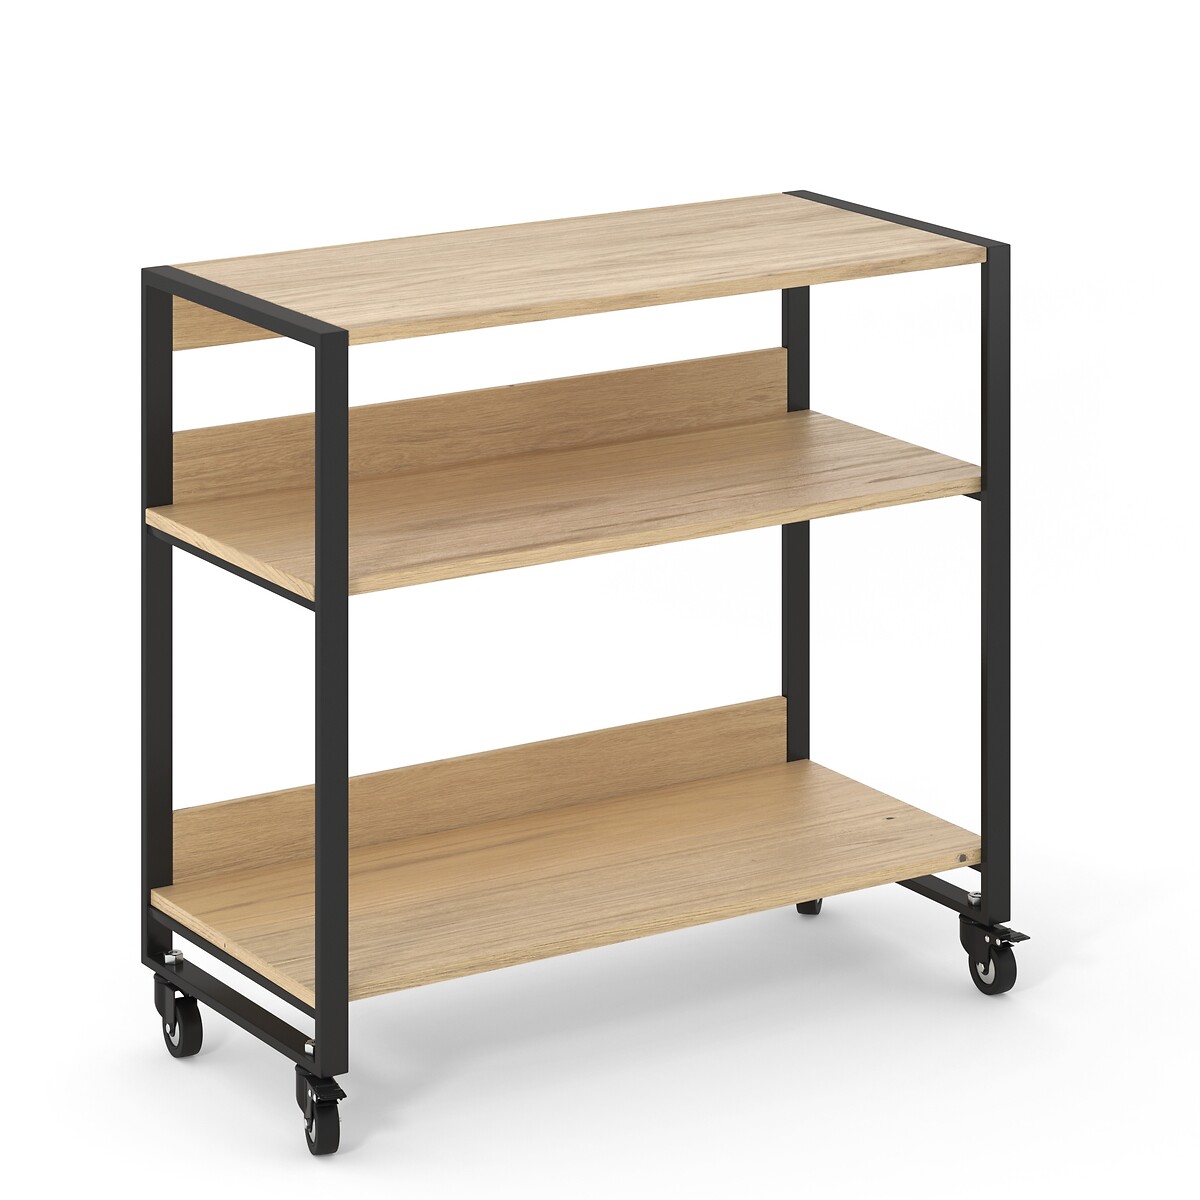 Hiba Serving Trolley with Casters